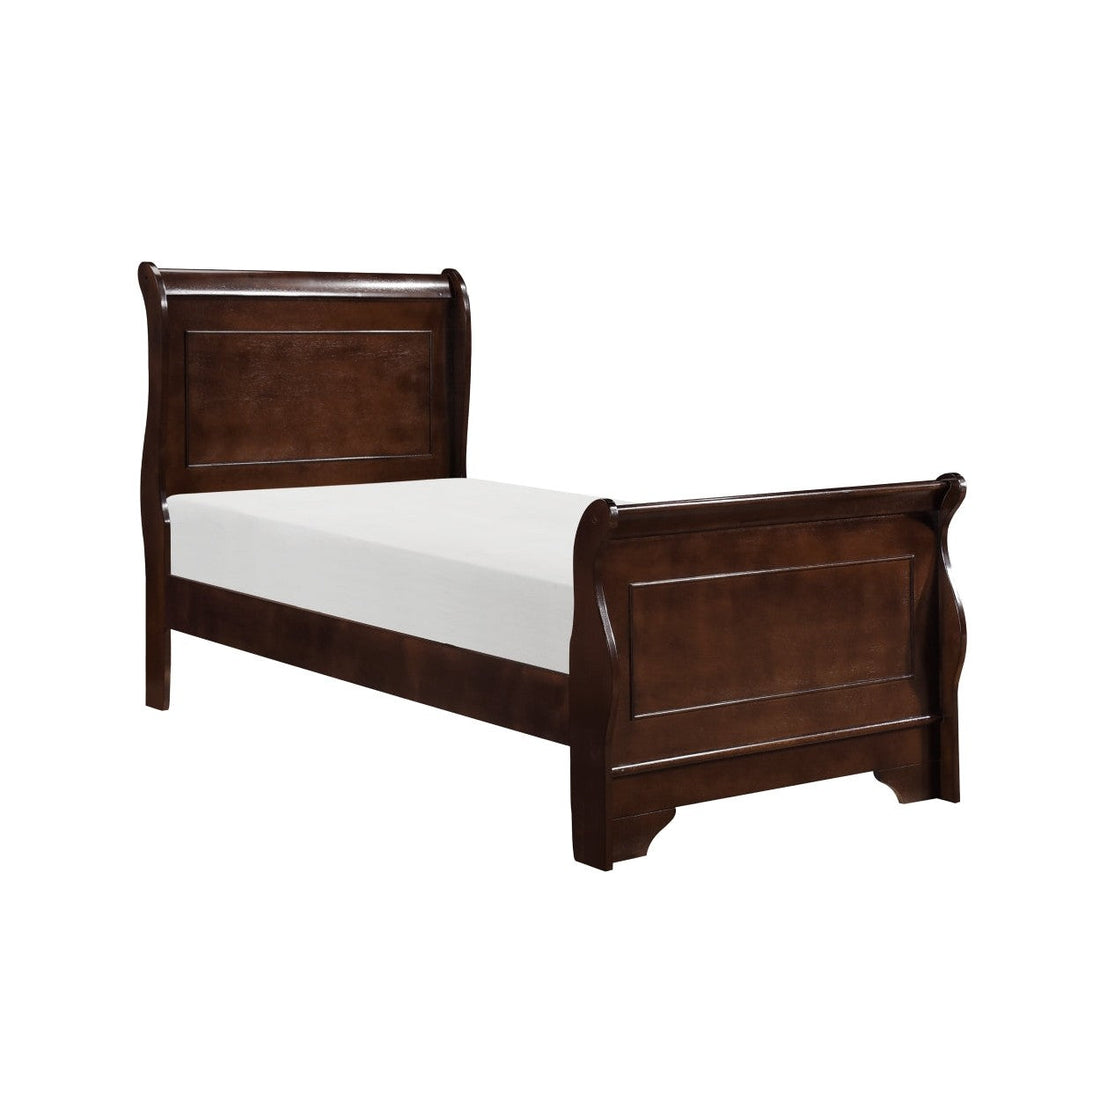 (2) TWIN BED 1856T-1*